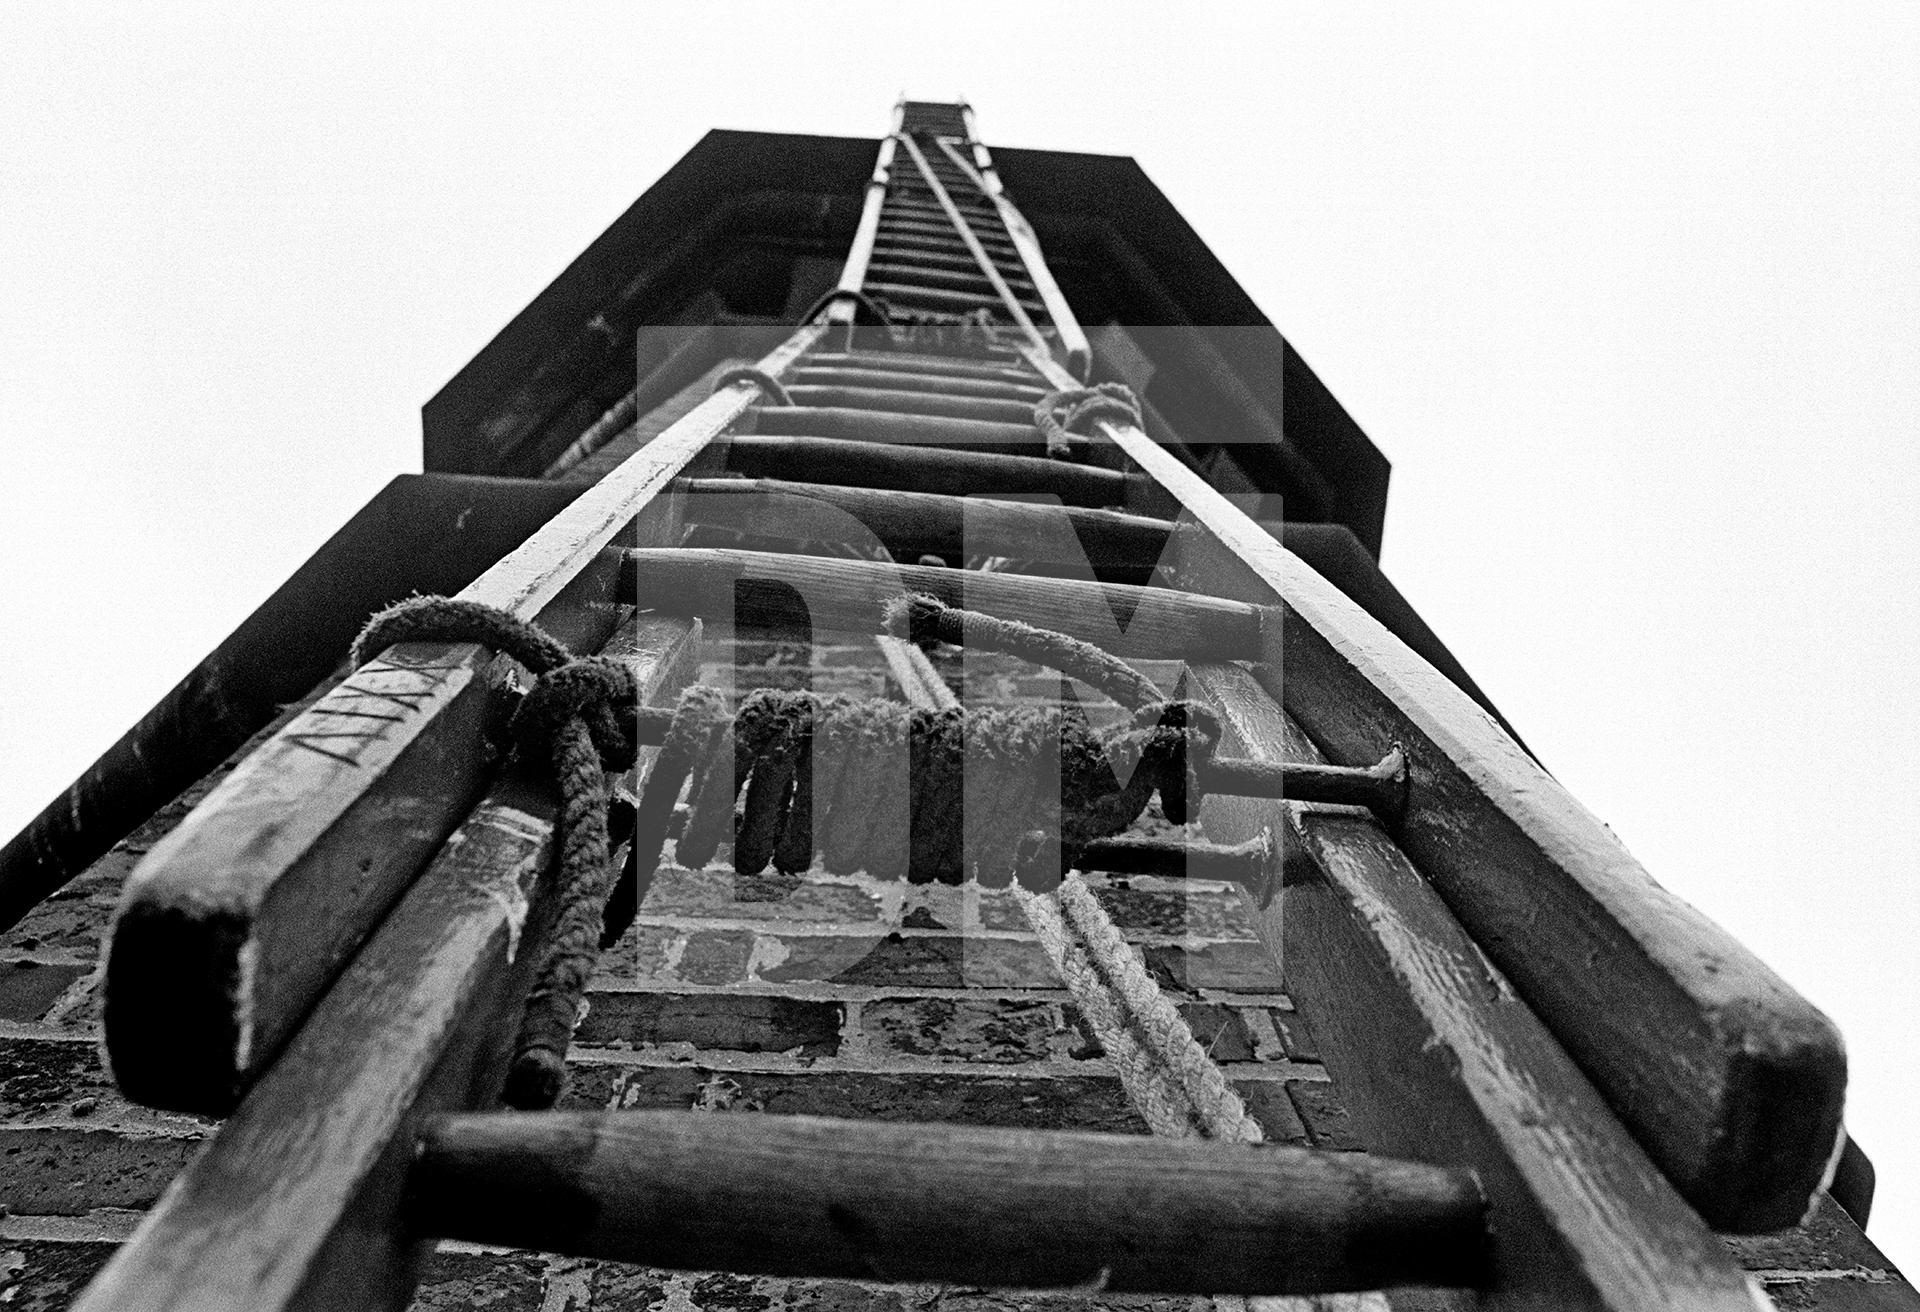 Looking up at the oversailer from just beneath the lower string course. Ladders are all in place with lashings clearly visible. September 1976 by Daniel Meadows